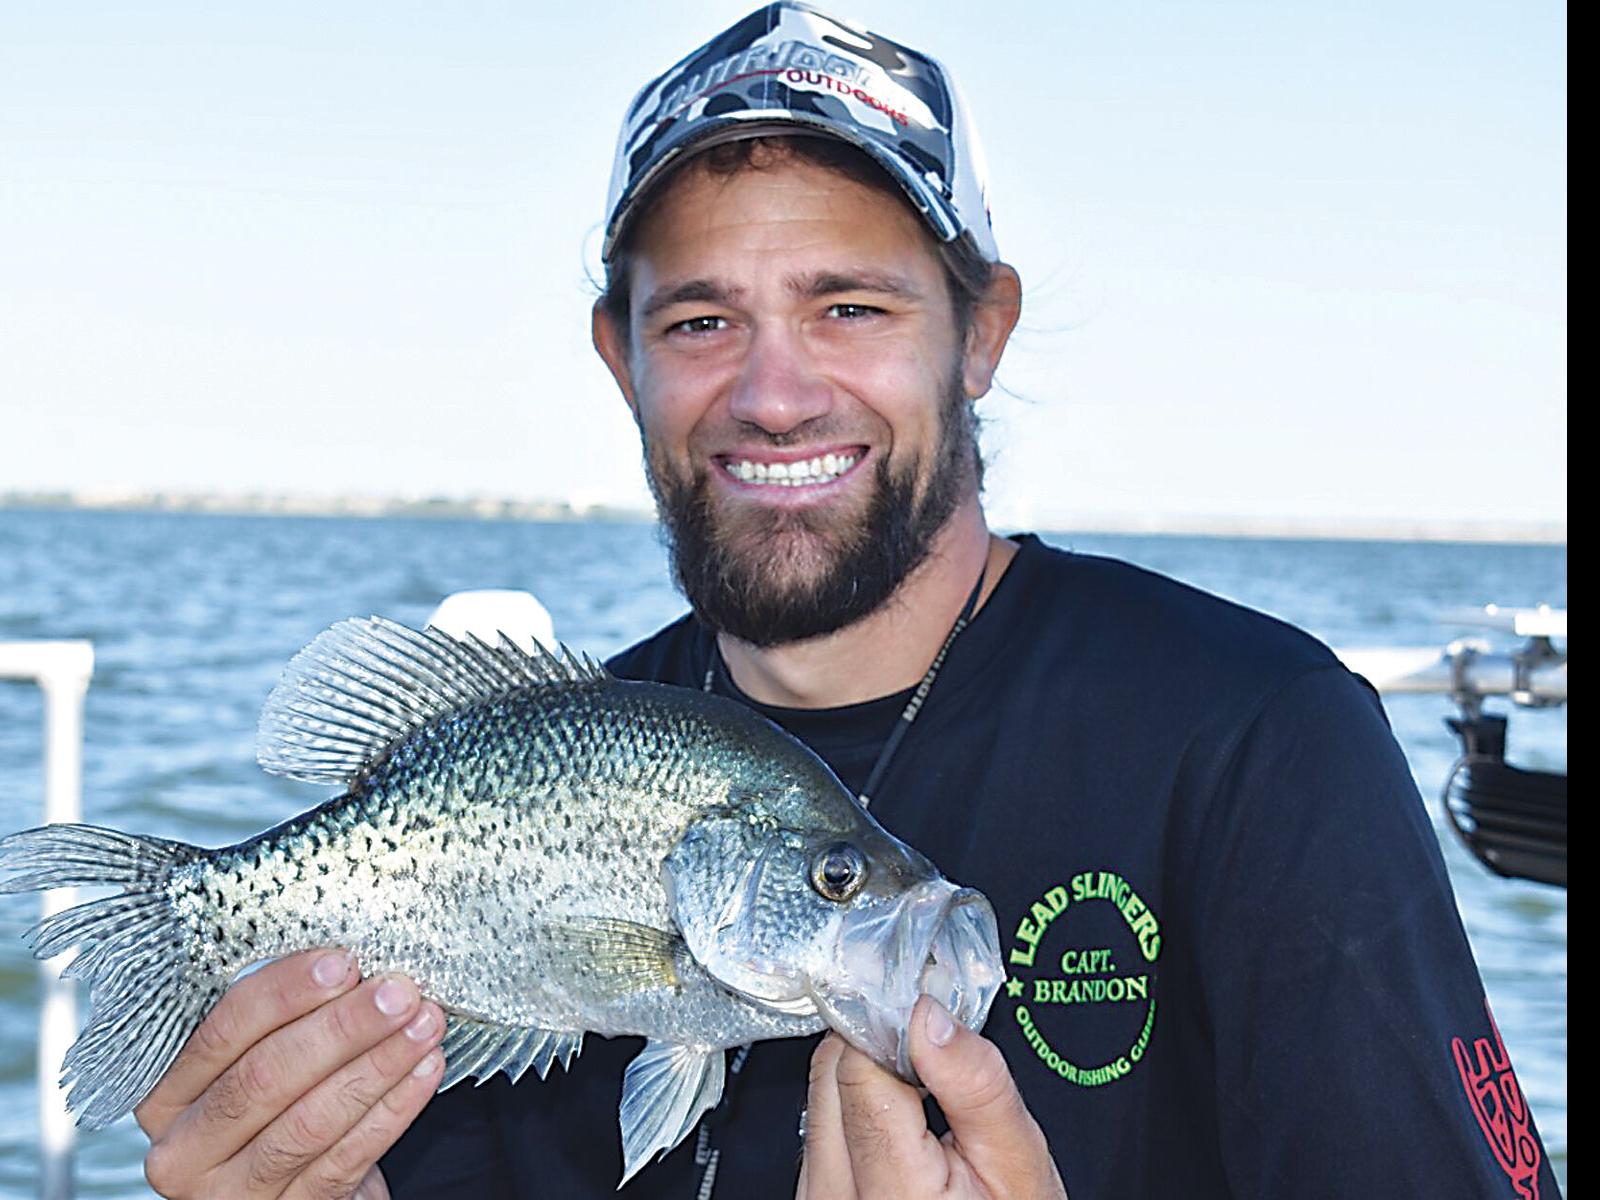 Outdoors with Luke: Luke fishes for hyrids, crappie at Ray Hubbard